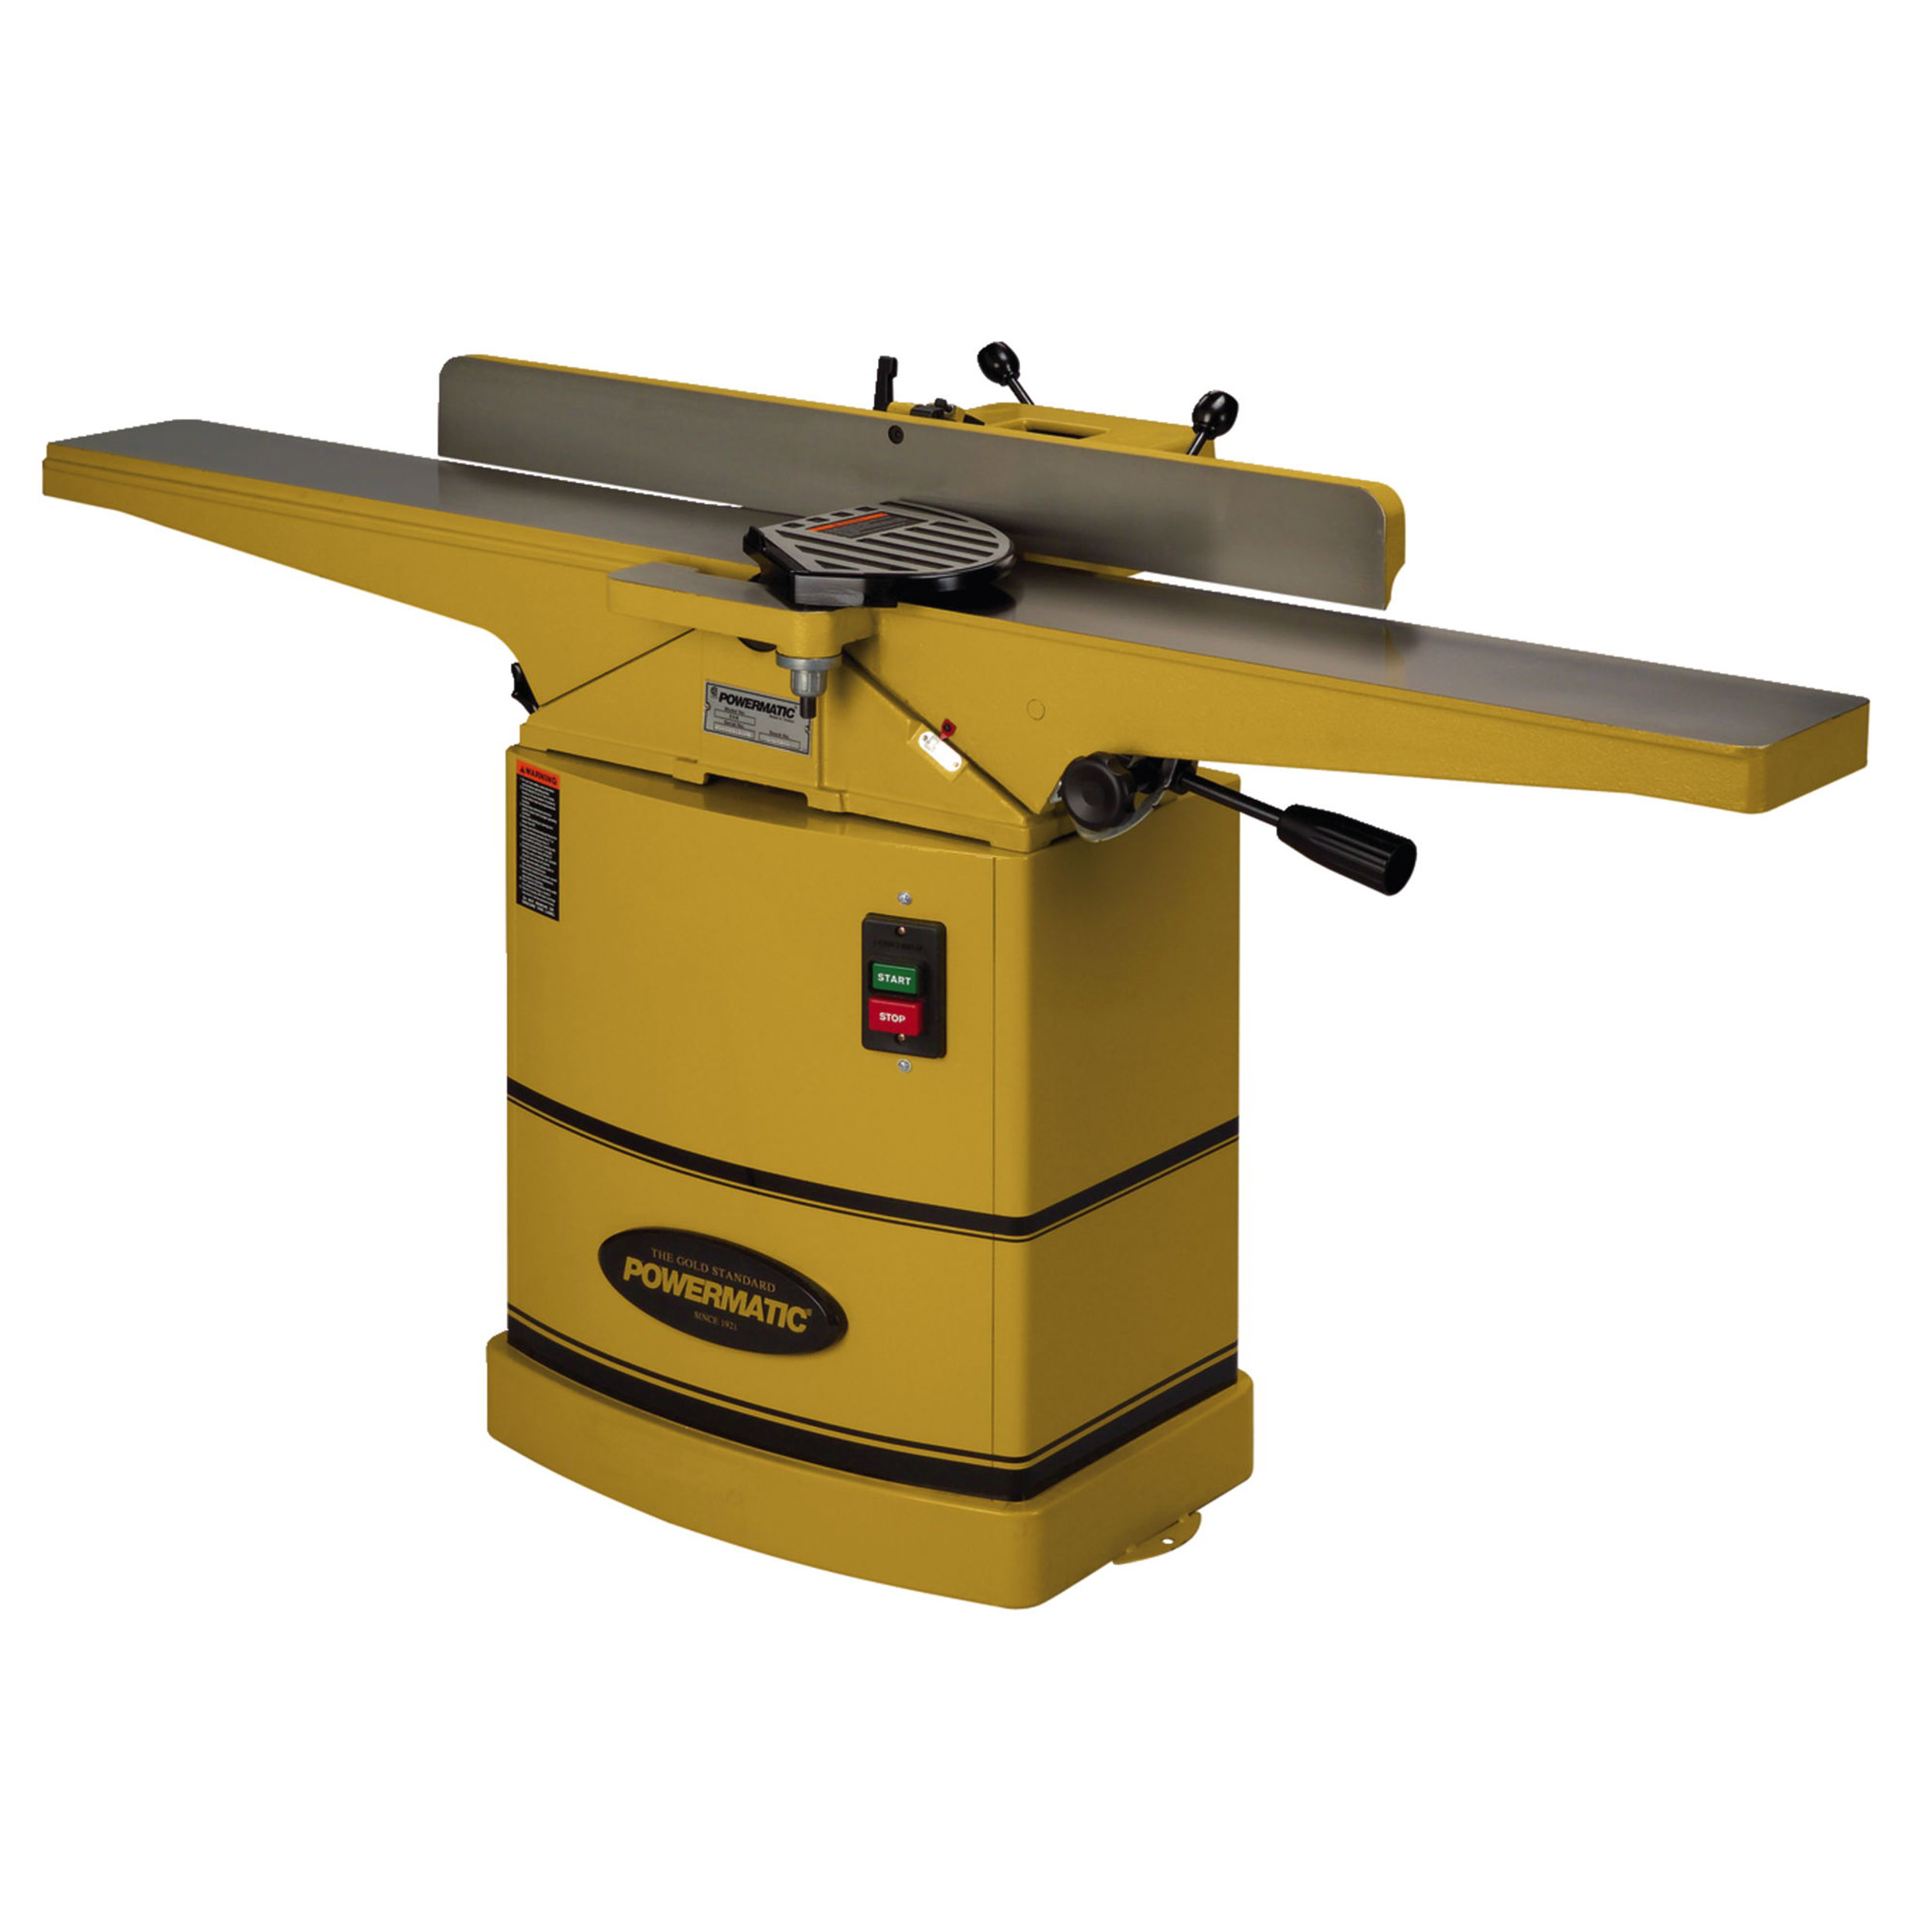 6" Jointer W/ Qs Knives, Model 54a